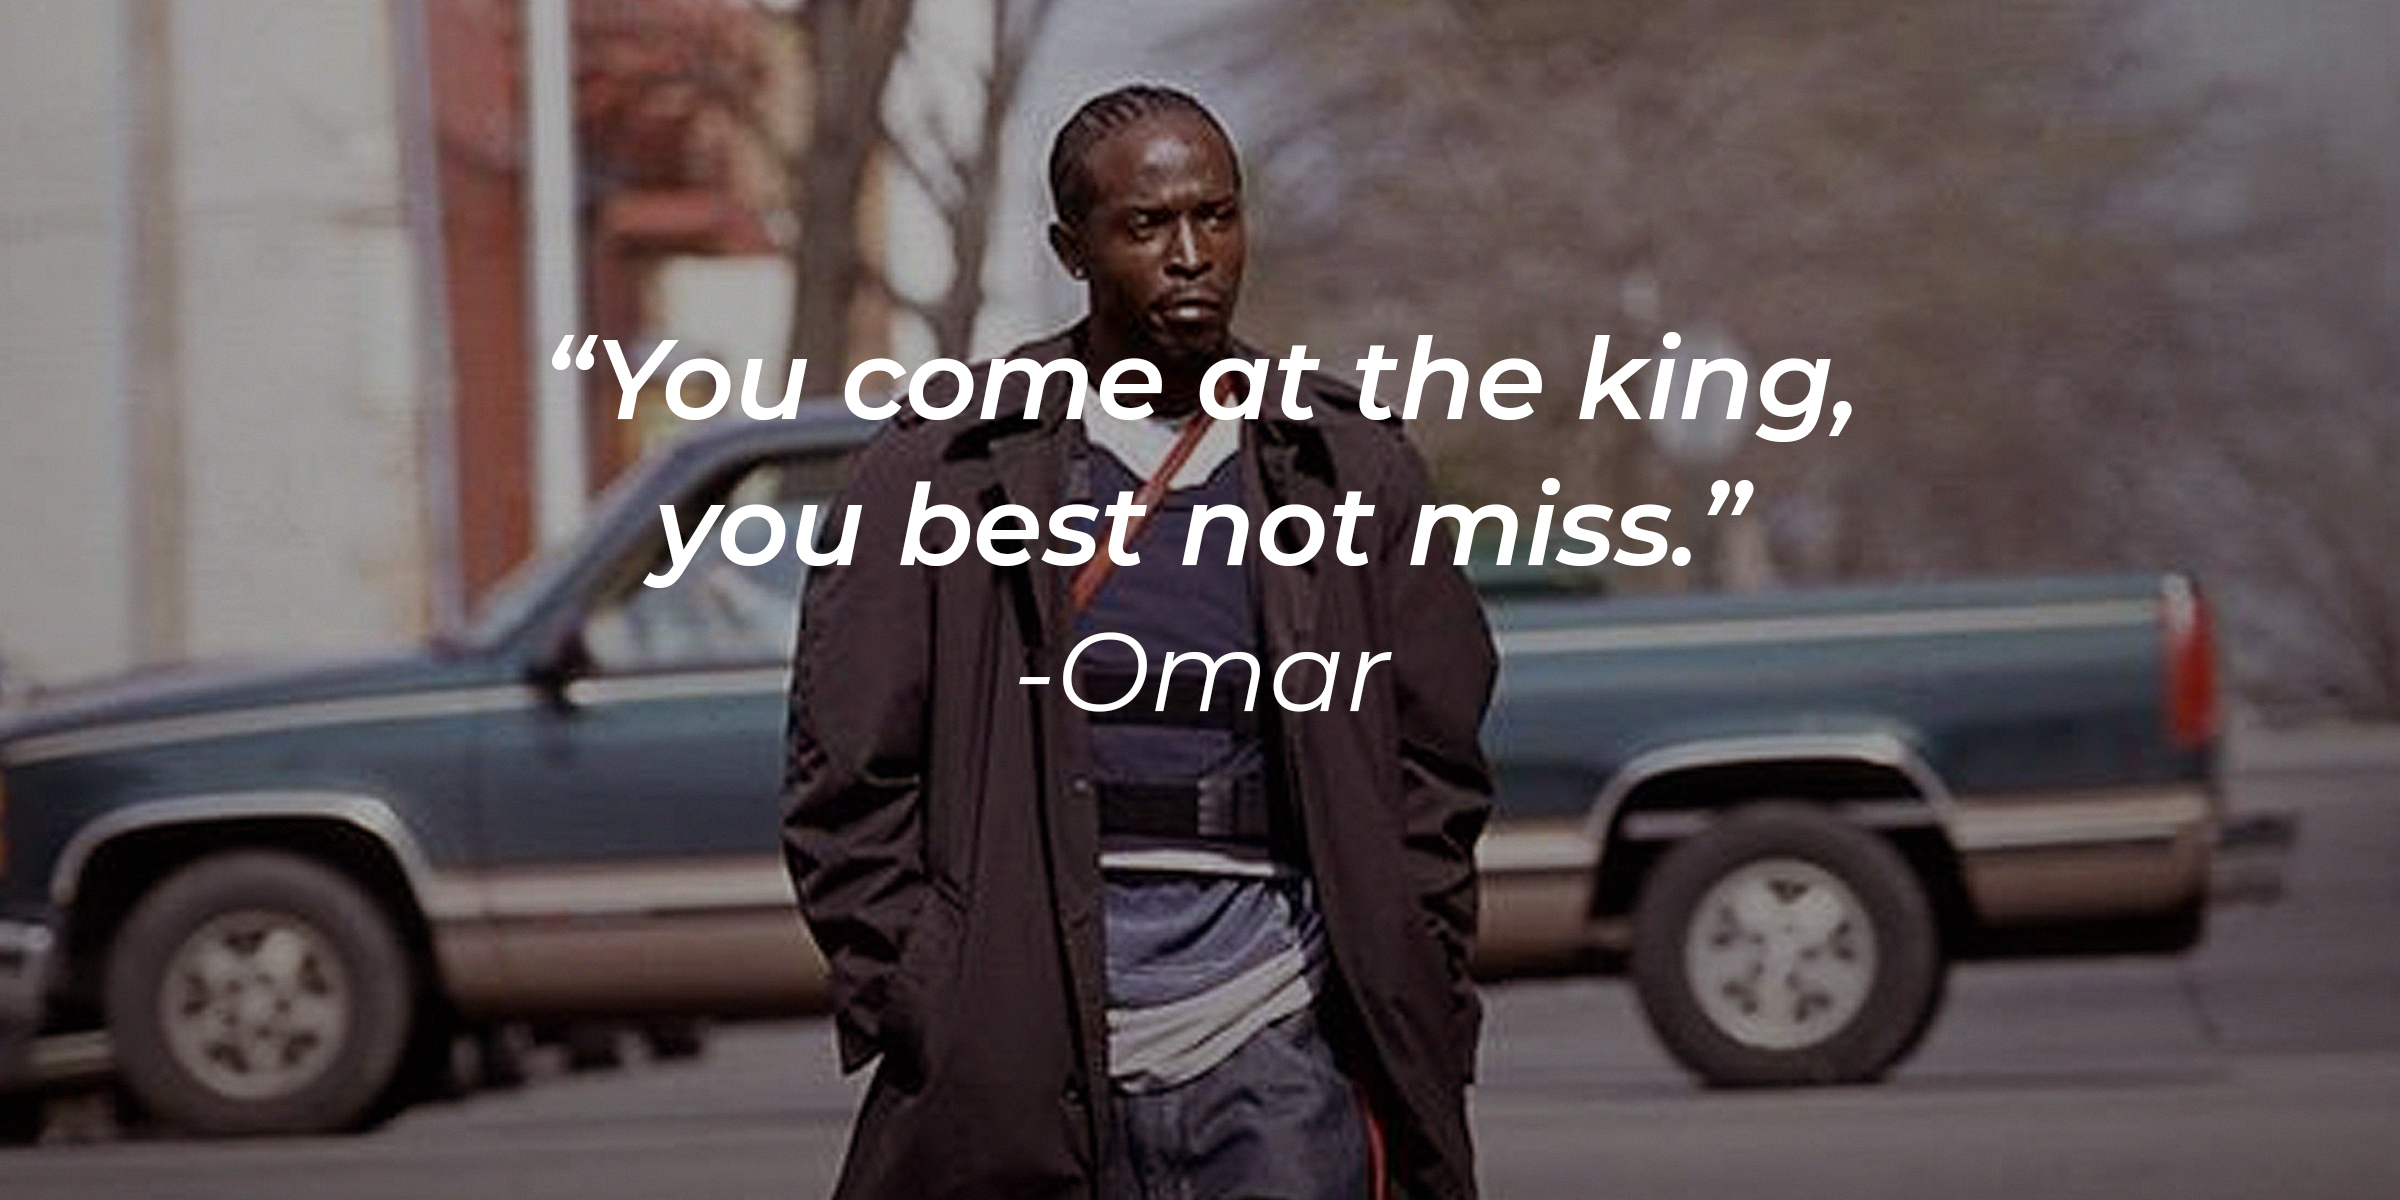 A photo of Omar Little with the quote: "You come at the king, you best not miss." | Source: facebook.com/TheWire